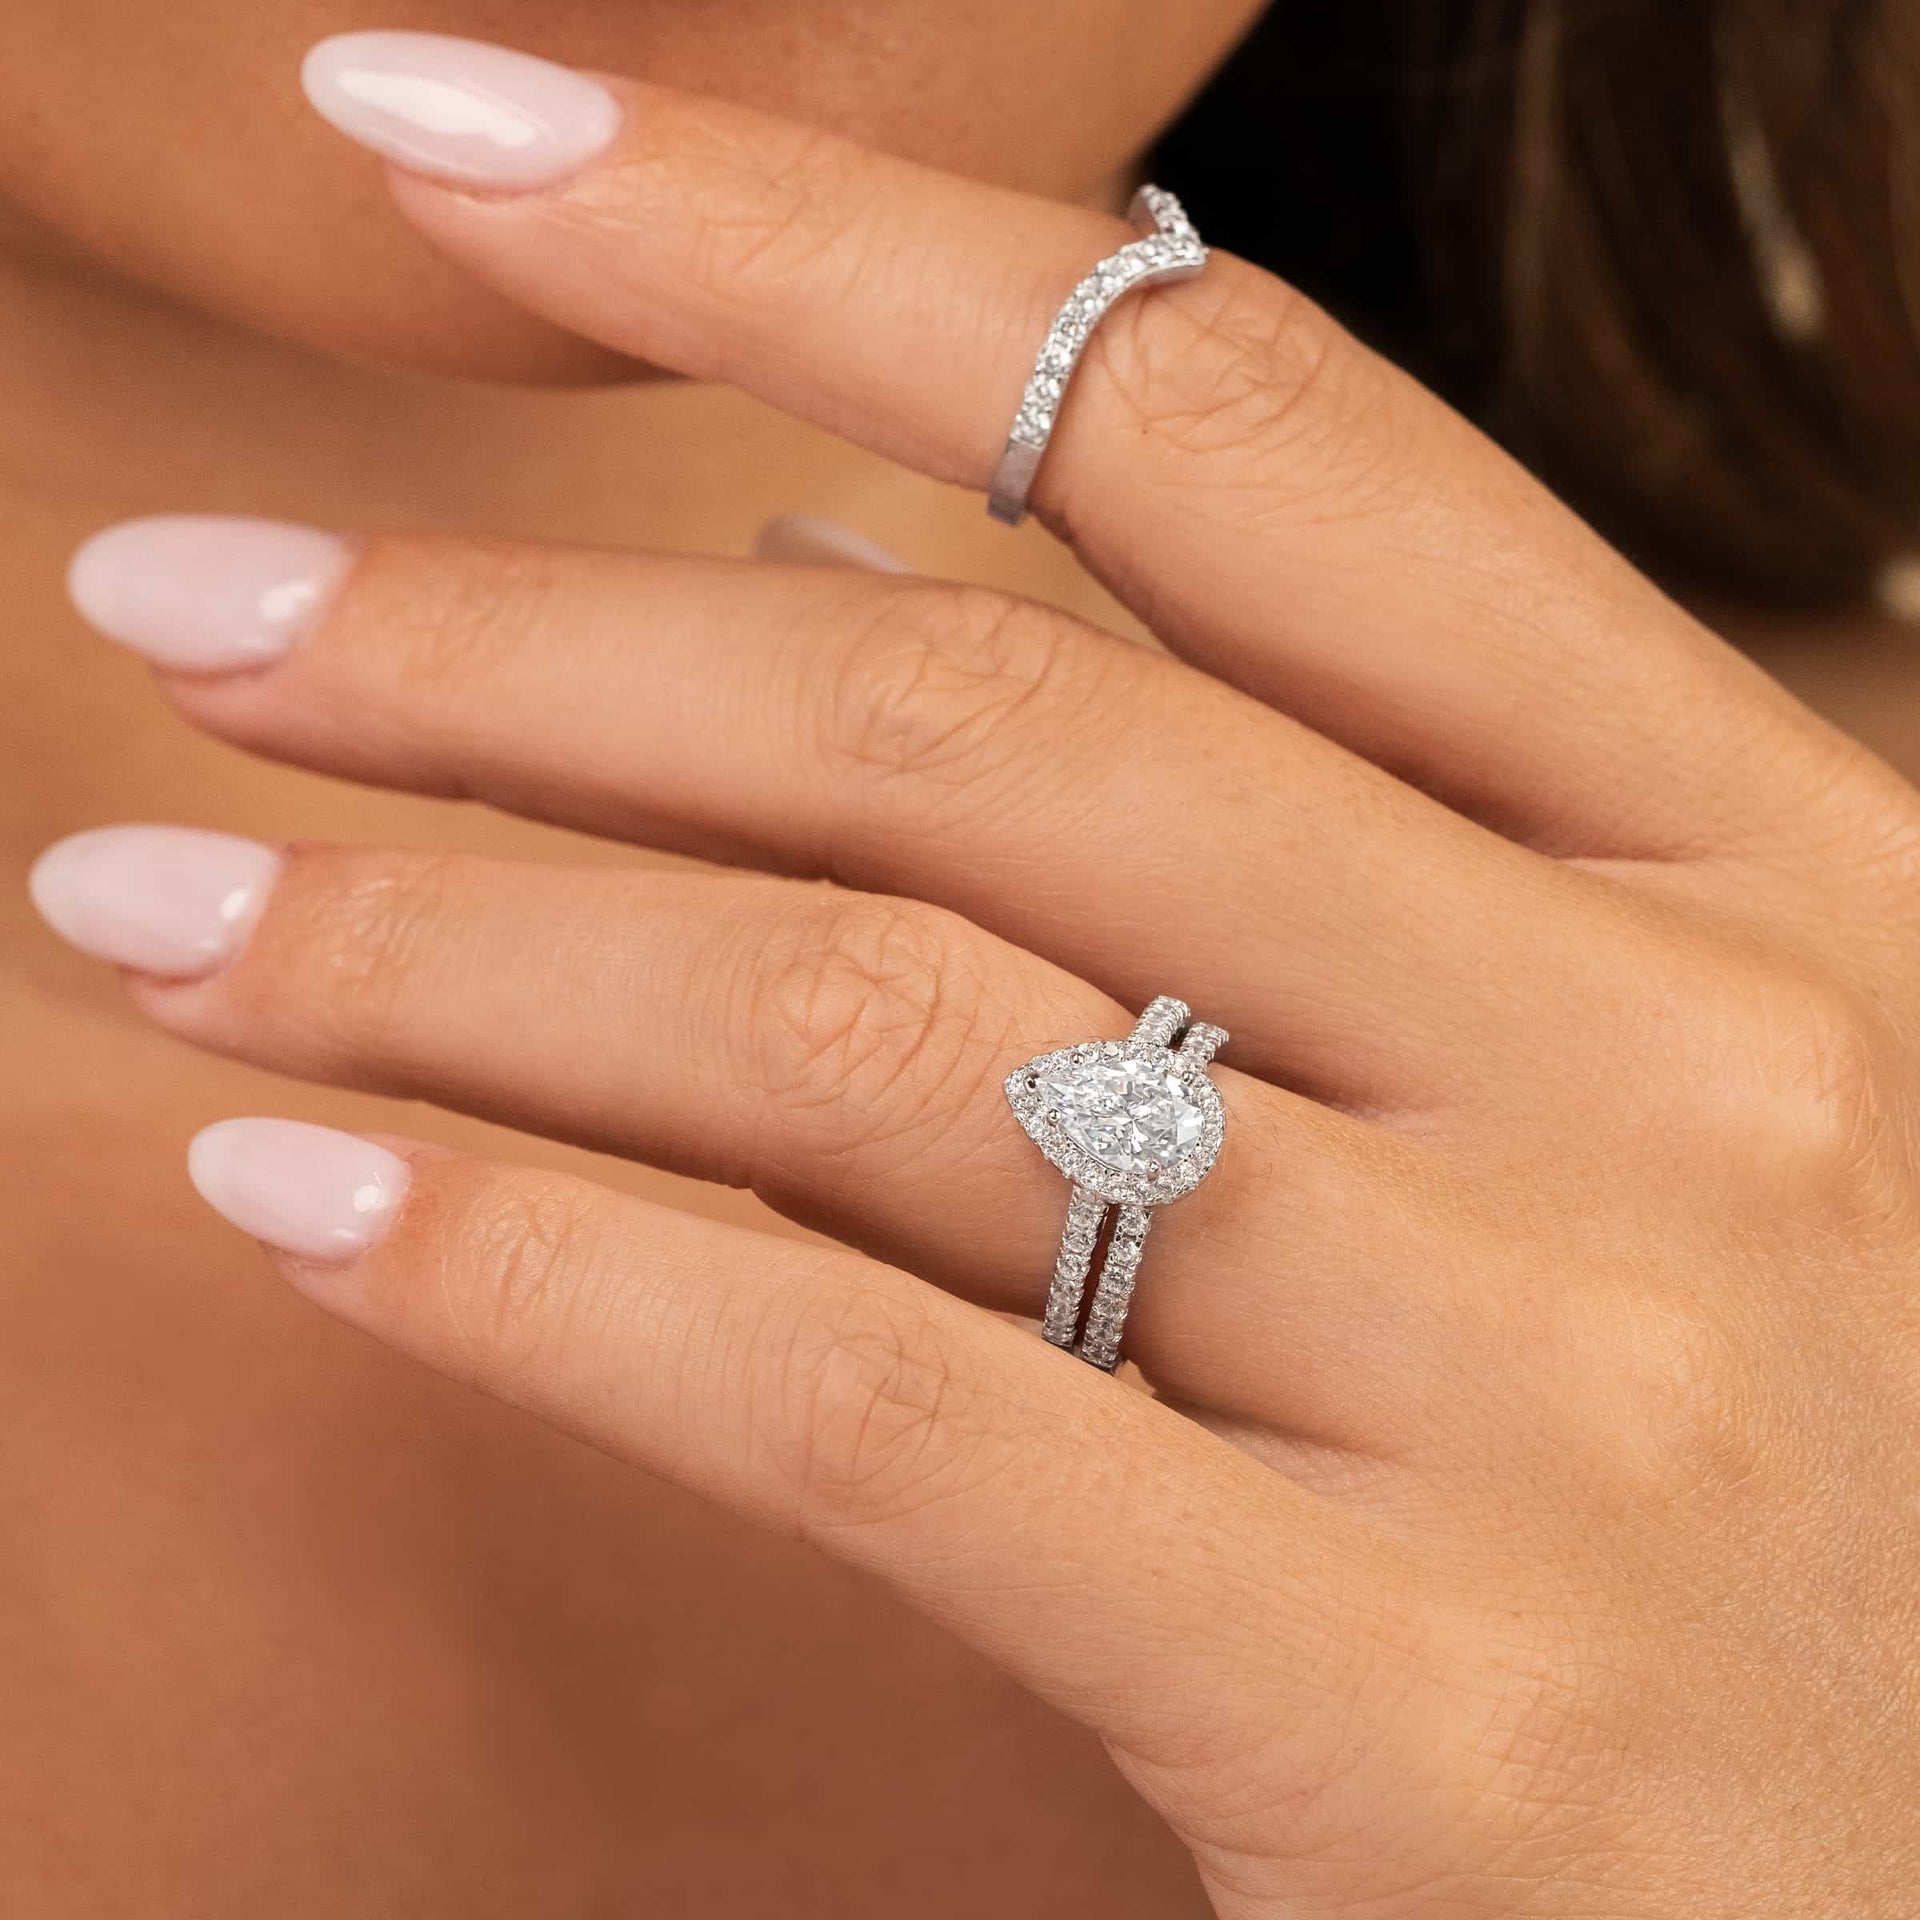 girl wearing pear shaped engagement ring with wedding bands